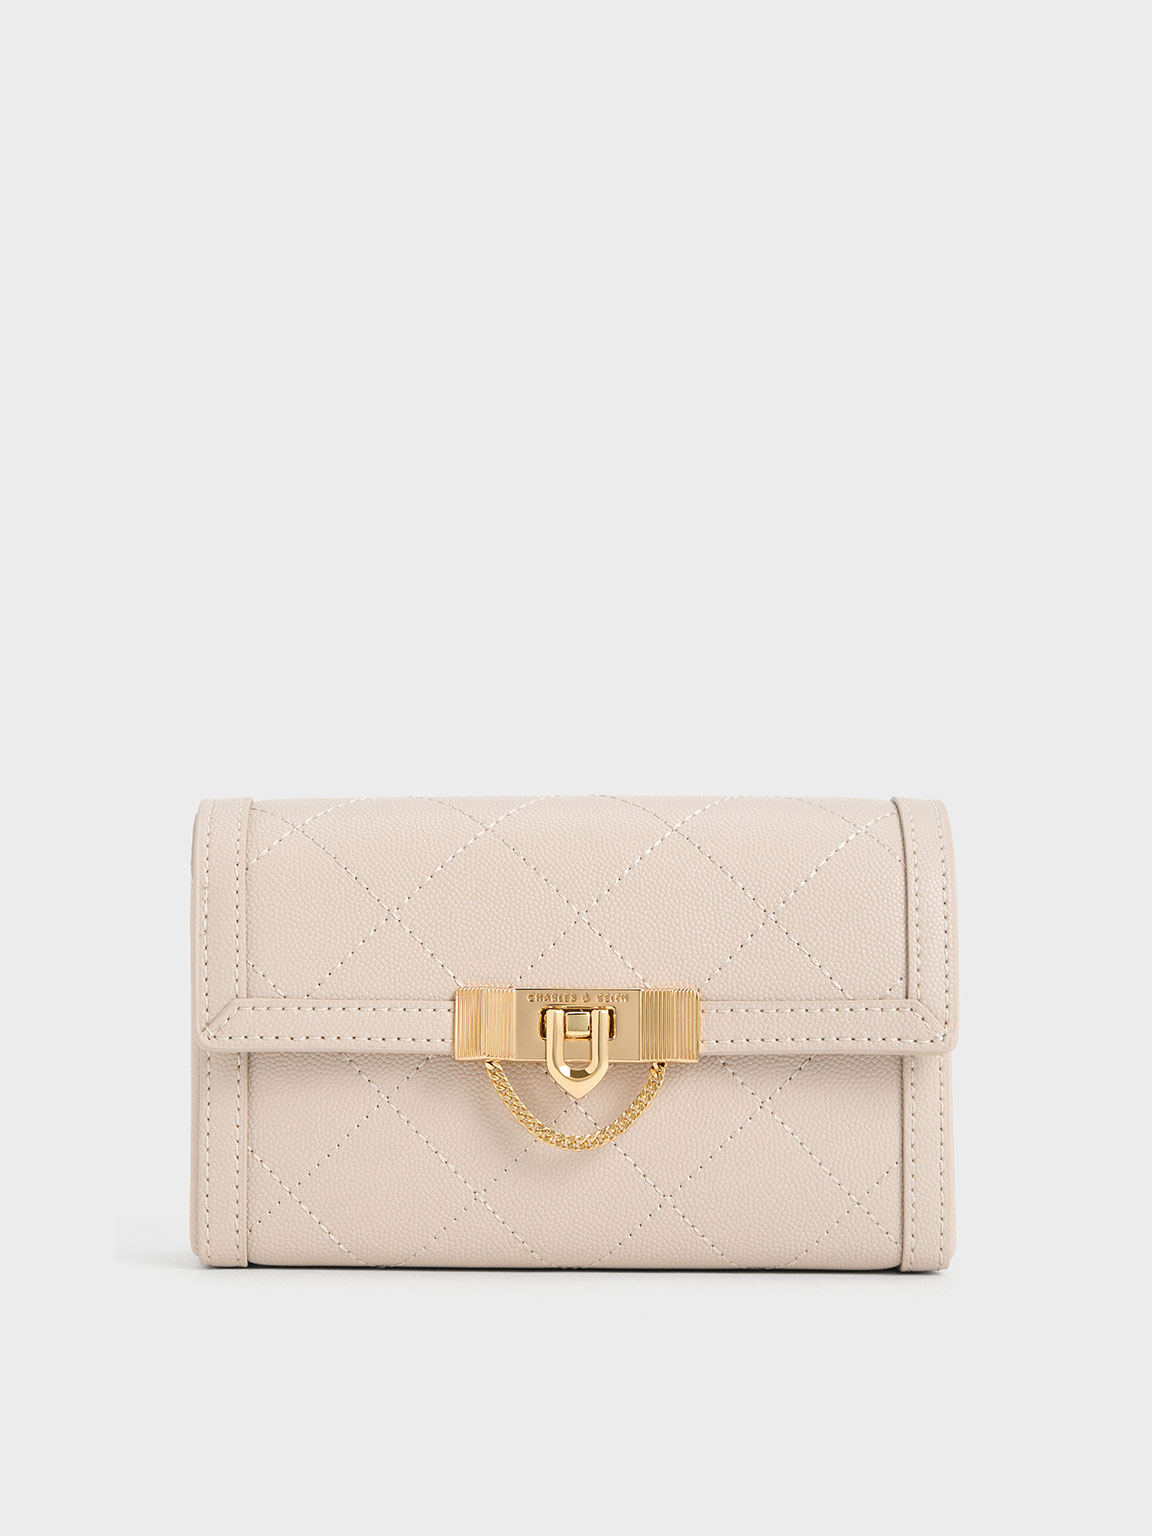 Charles & Keith Tallulah Quilted Push-lock Clutch In Oat